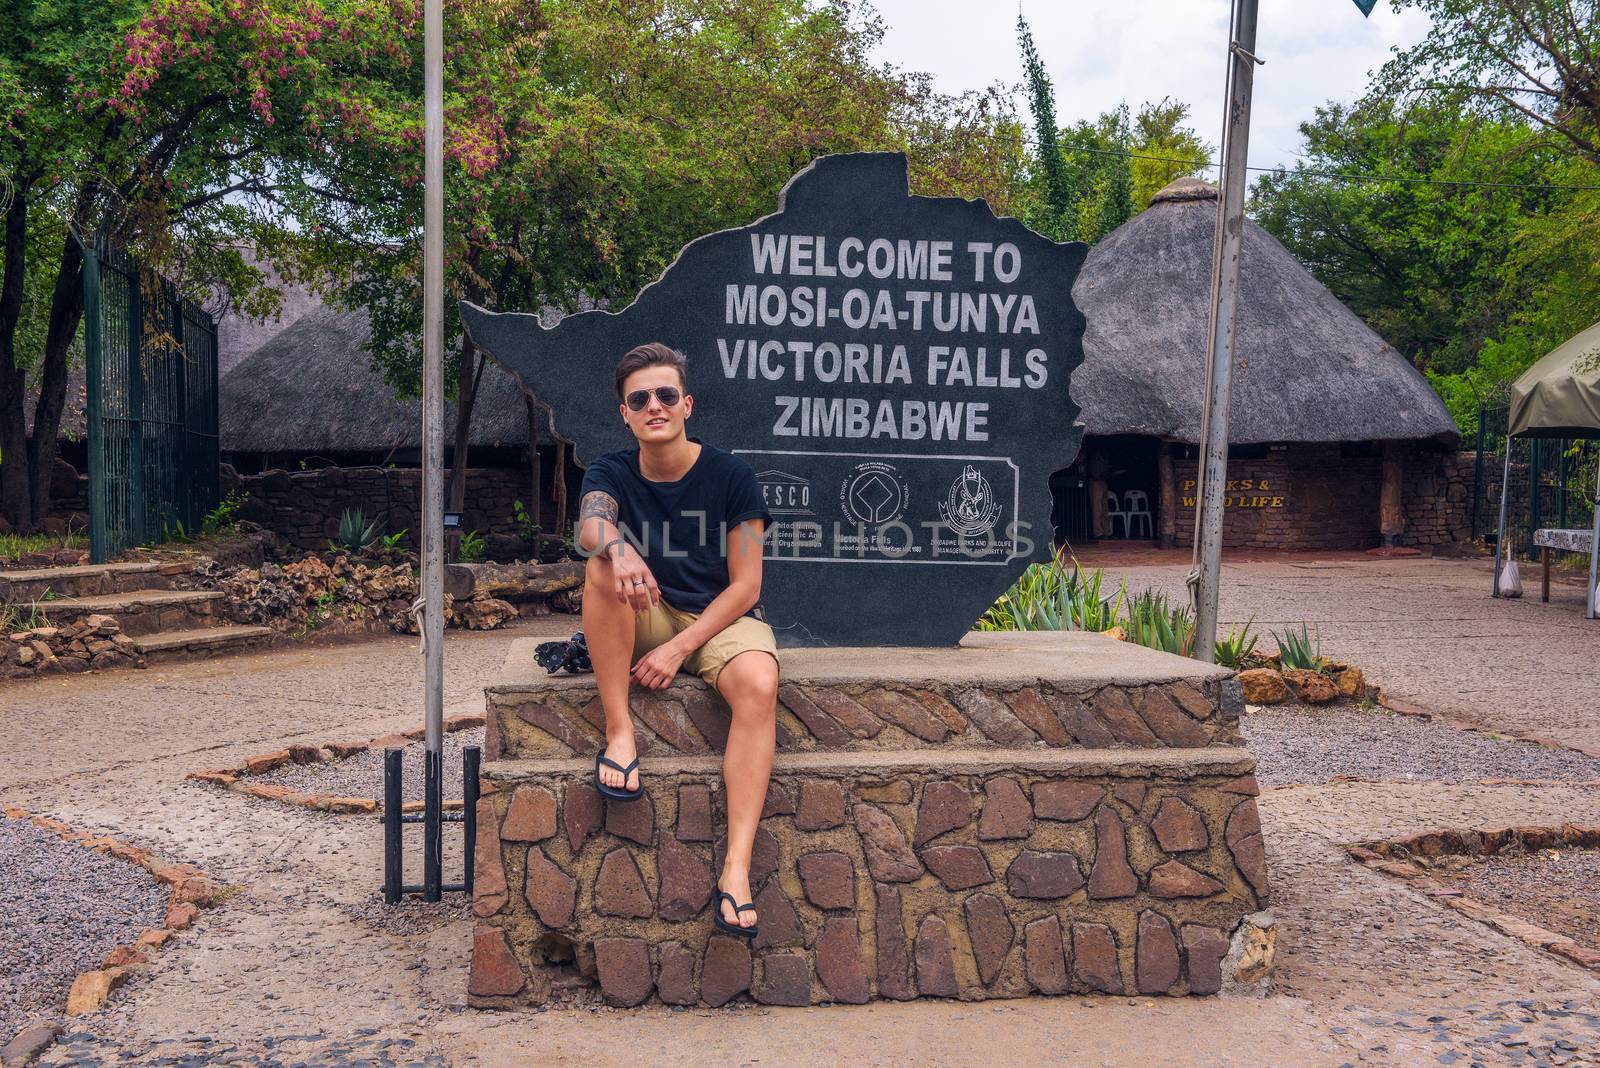 Victoria Falls, Zimbabwe - April 8, 2019 : Tourist sits on the welcome sign placed at the entry gate of Victoria Falls, Zimbabwe